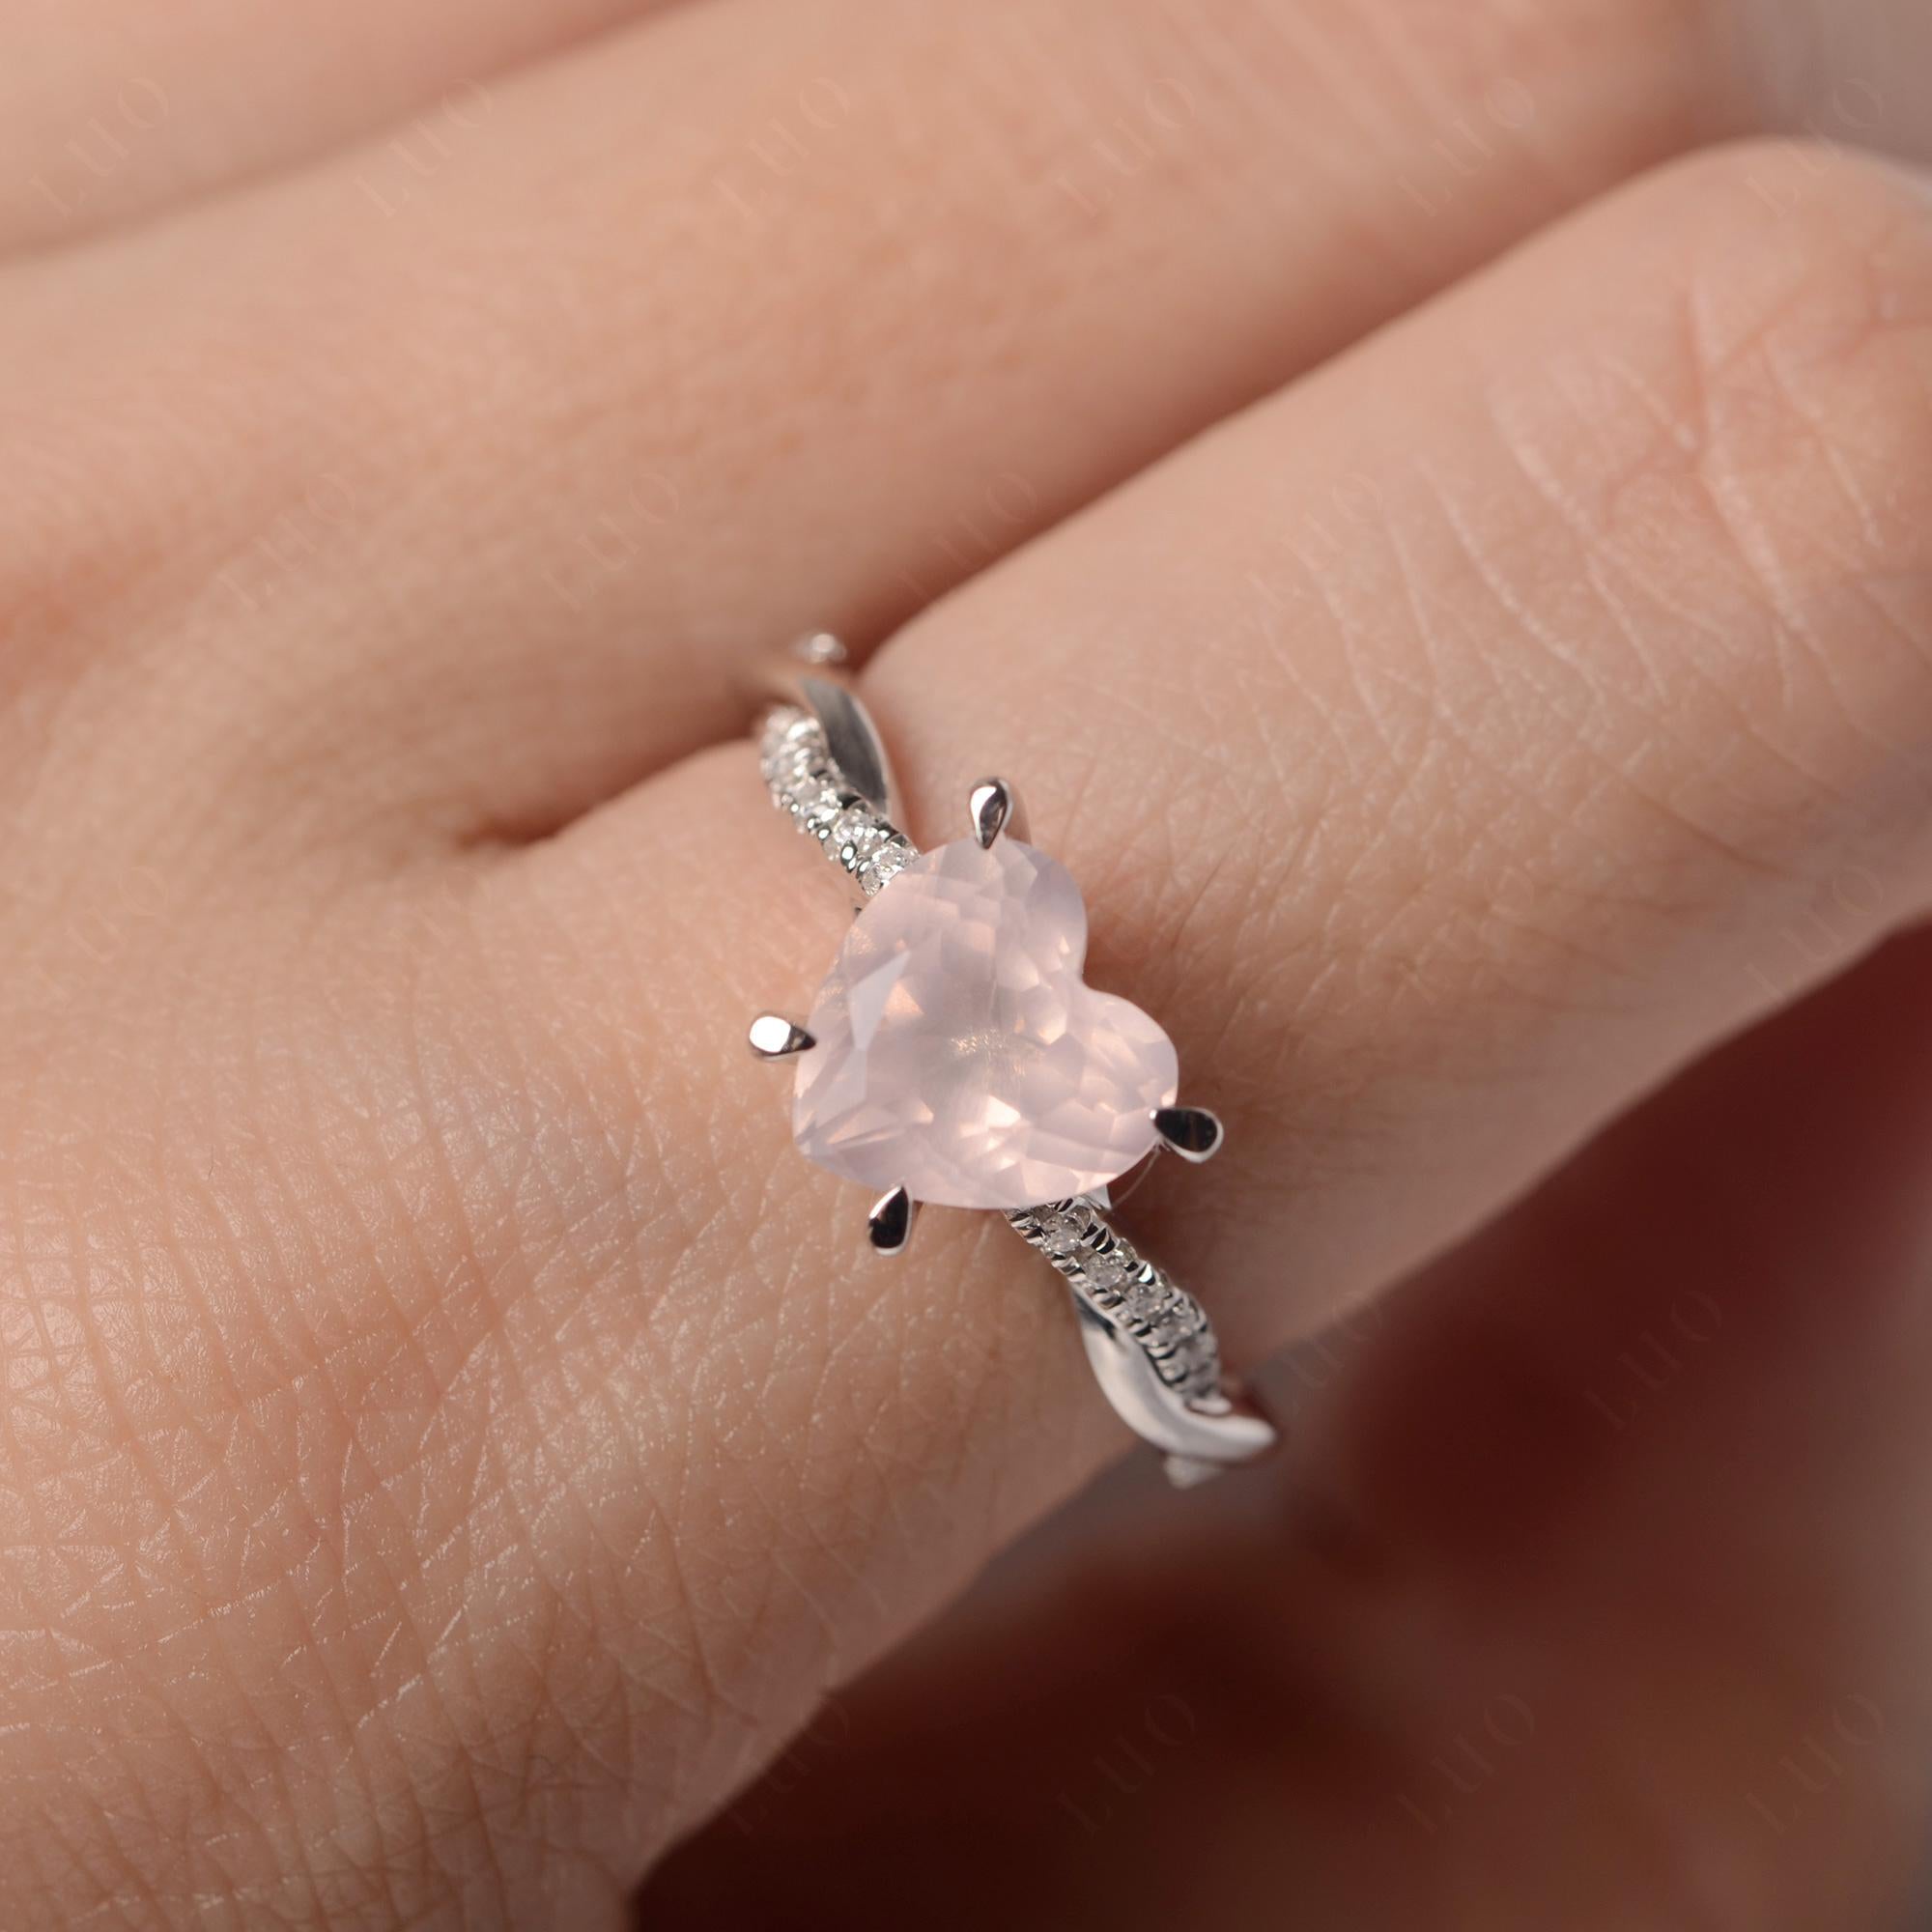 Twisted Heart Shaped Rose Quartz Ring - LUO Jewelry